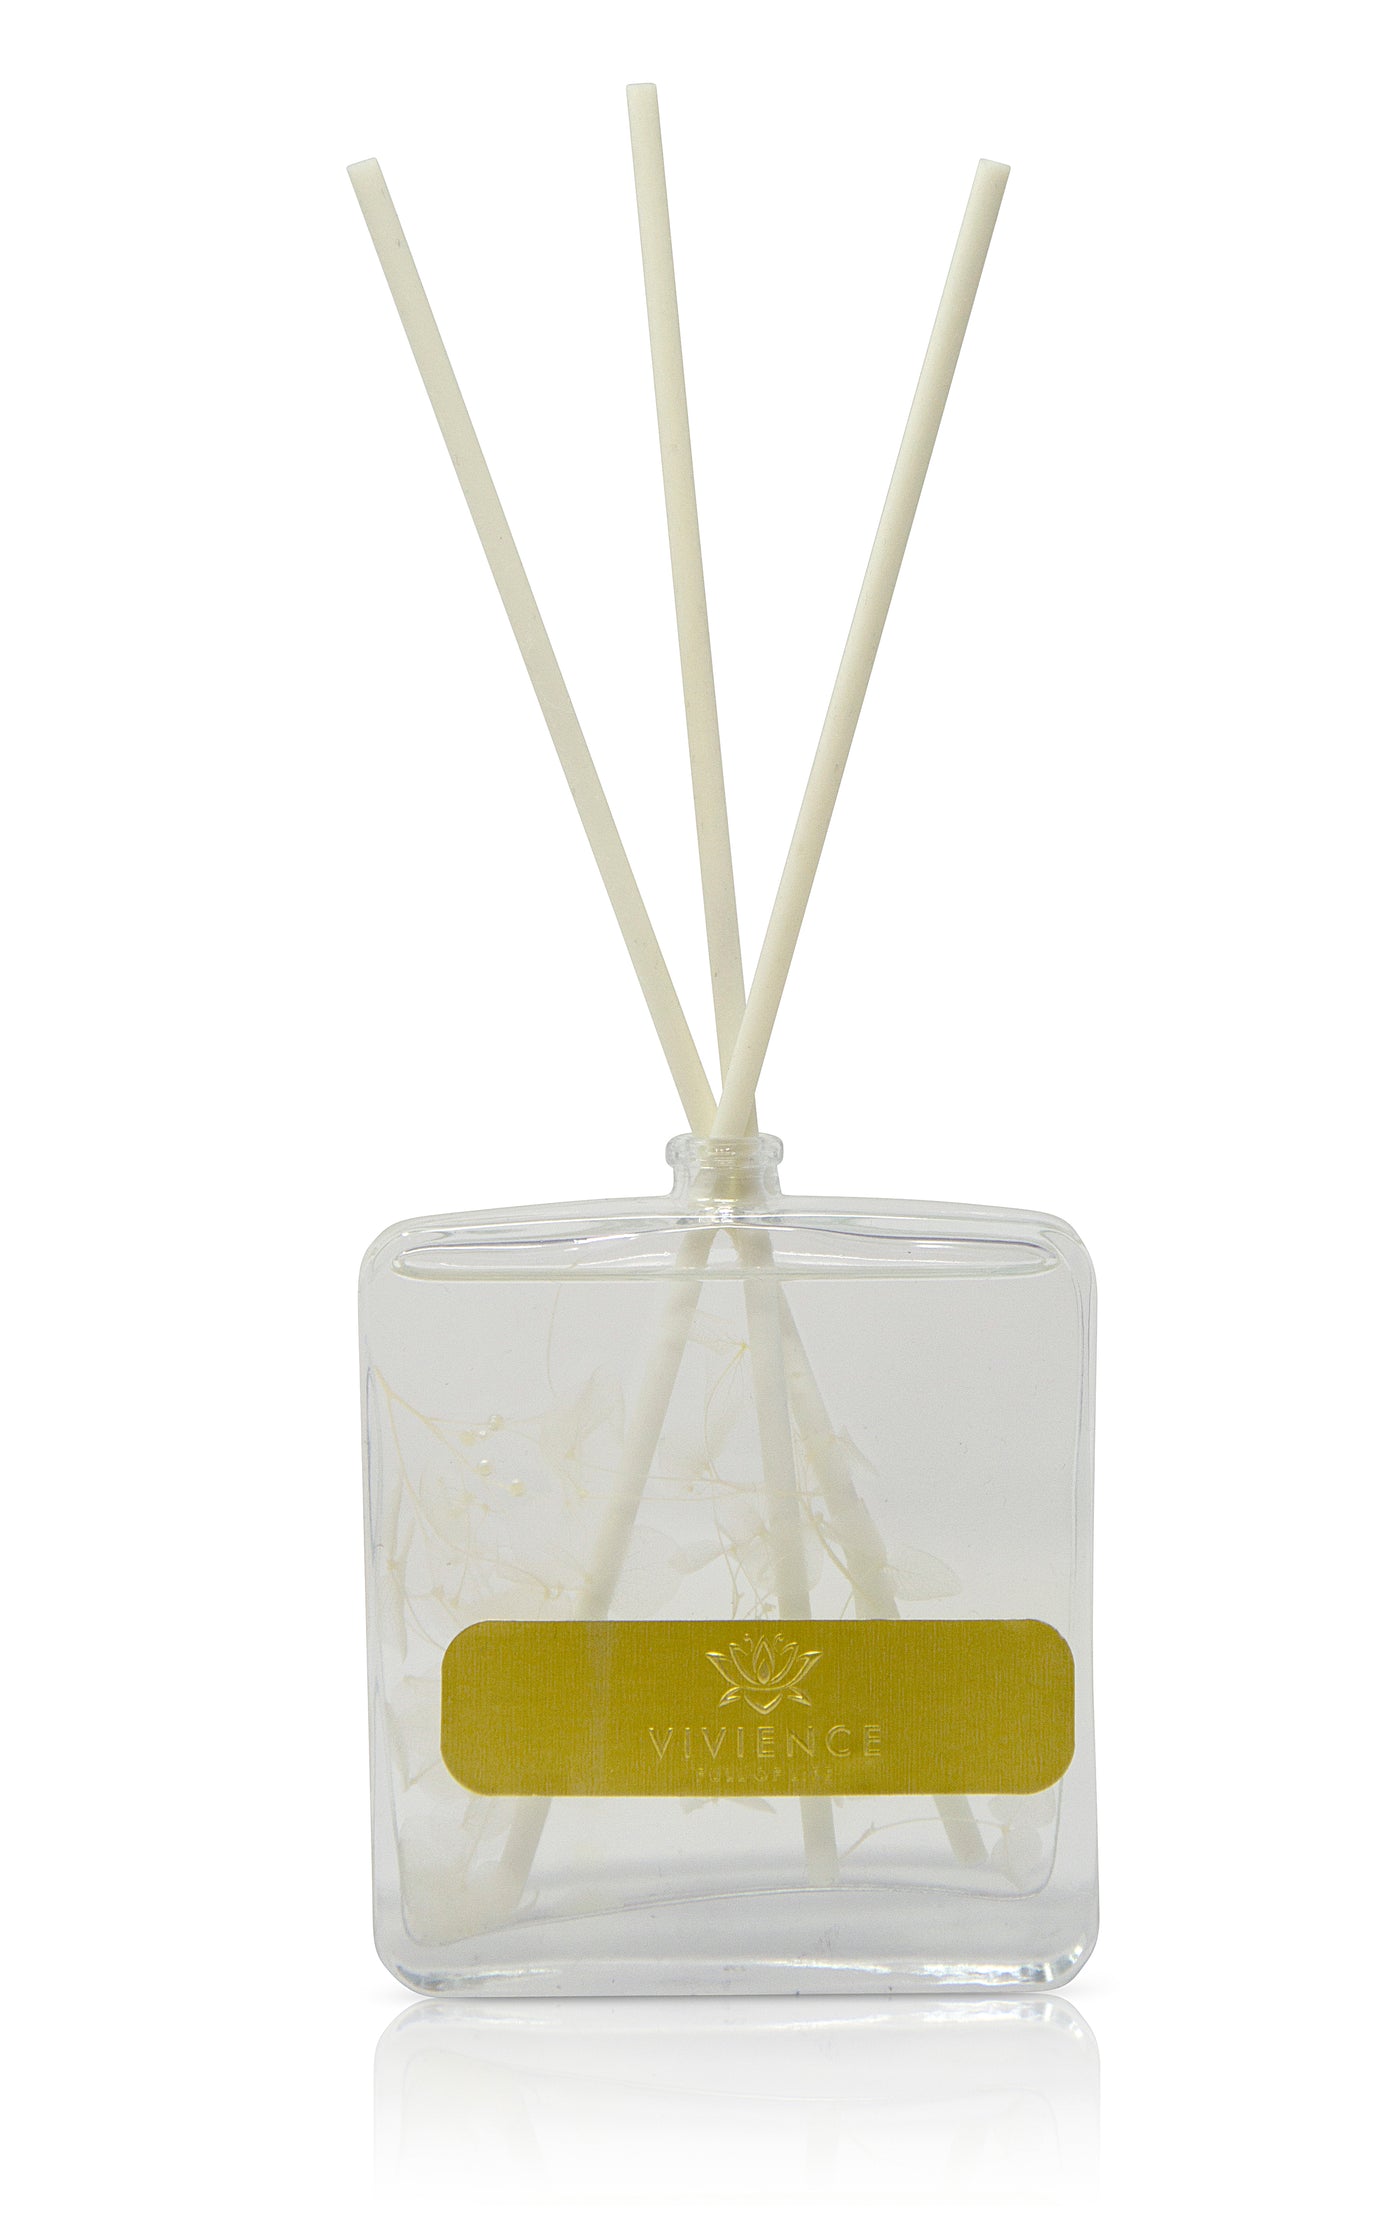 Air Wick Life Scents Reed Diffuser White Flowers - Raumerfrischer